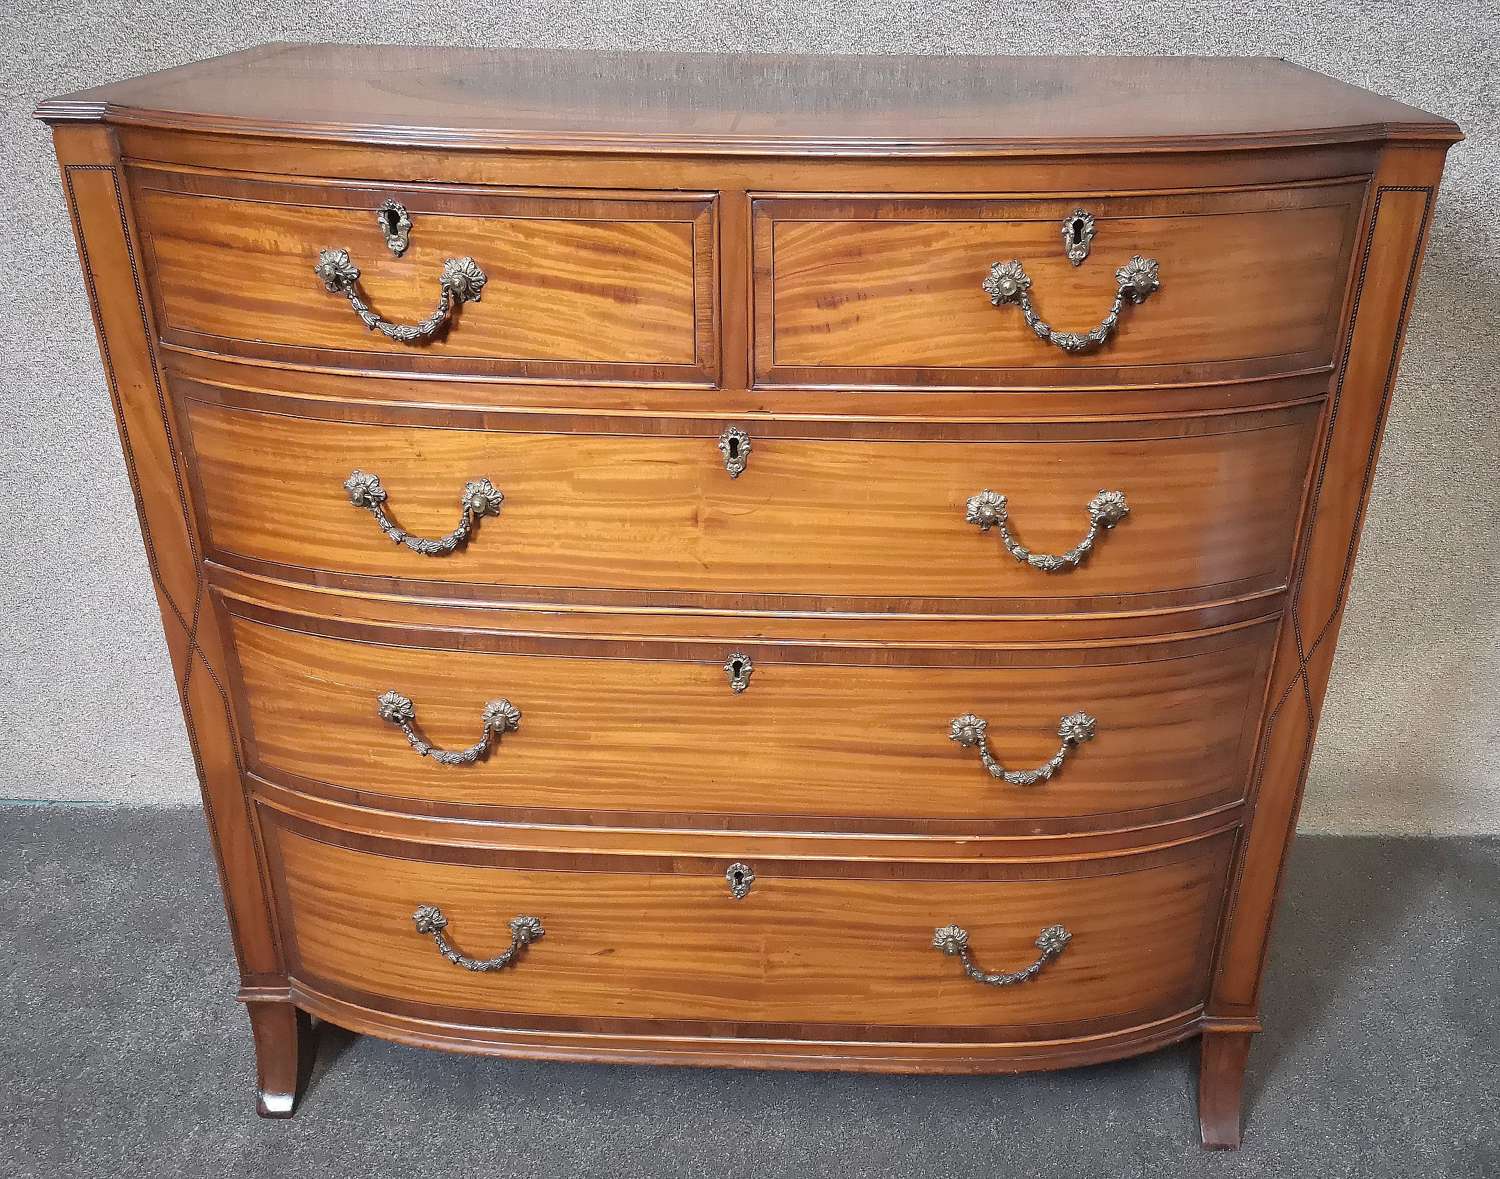 EDWARDIAN INLAID SATINWOOD BOW FRONTED CHEST OF DRAWERS